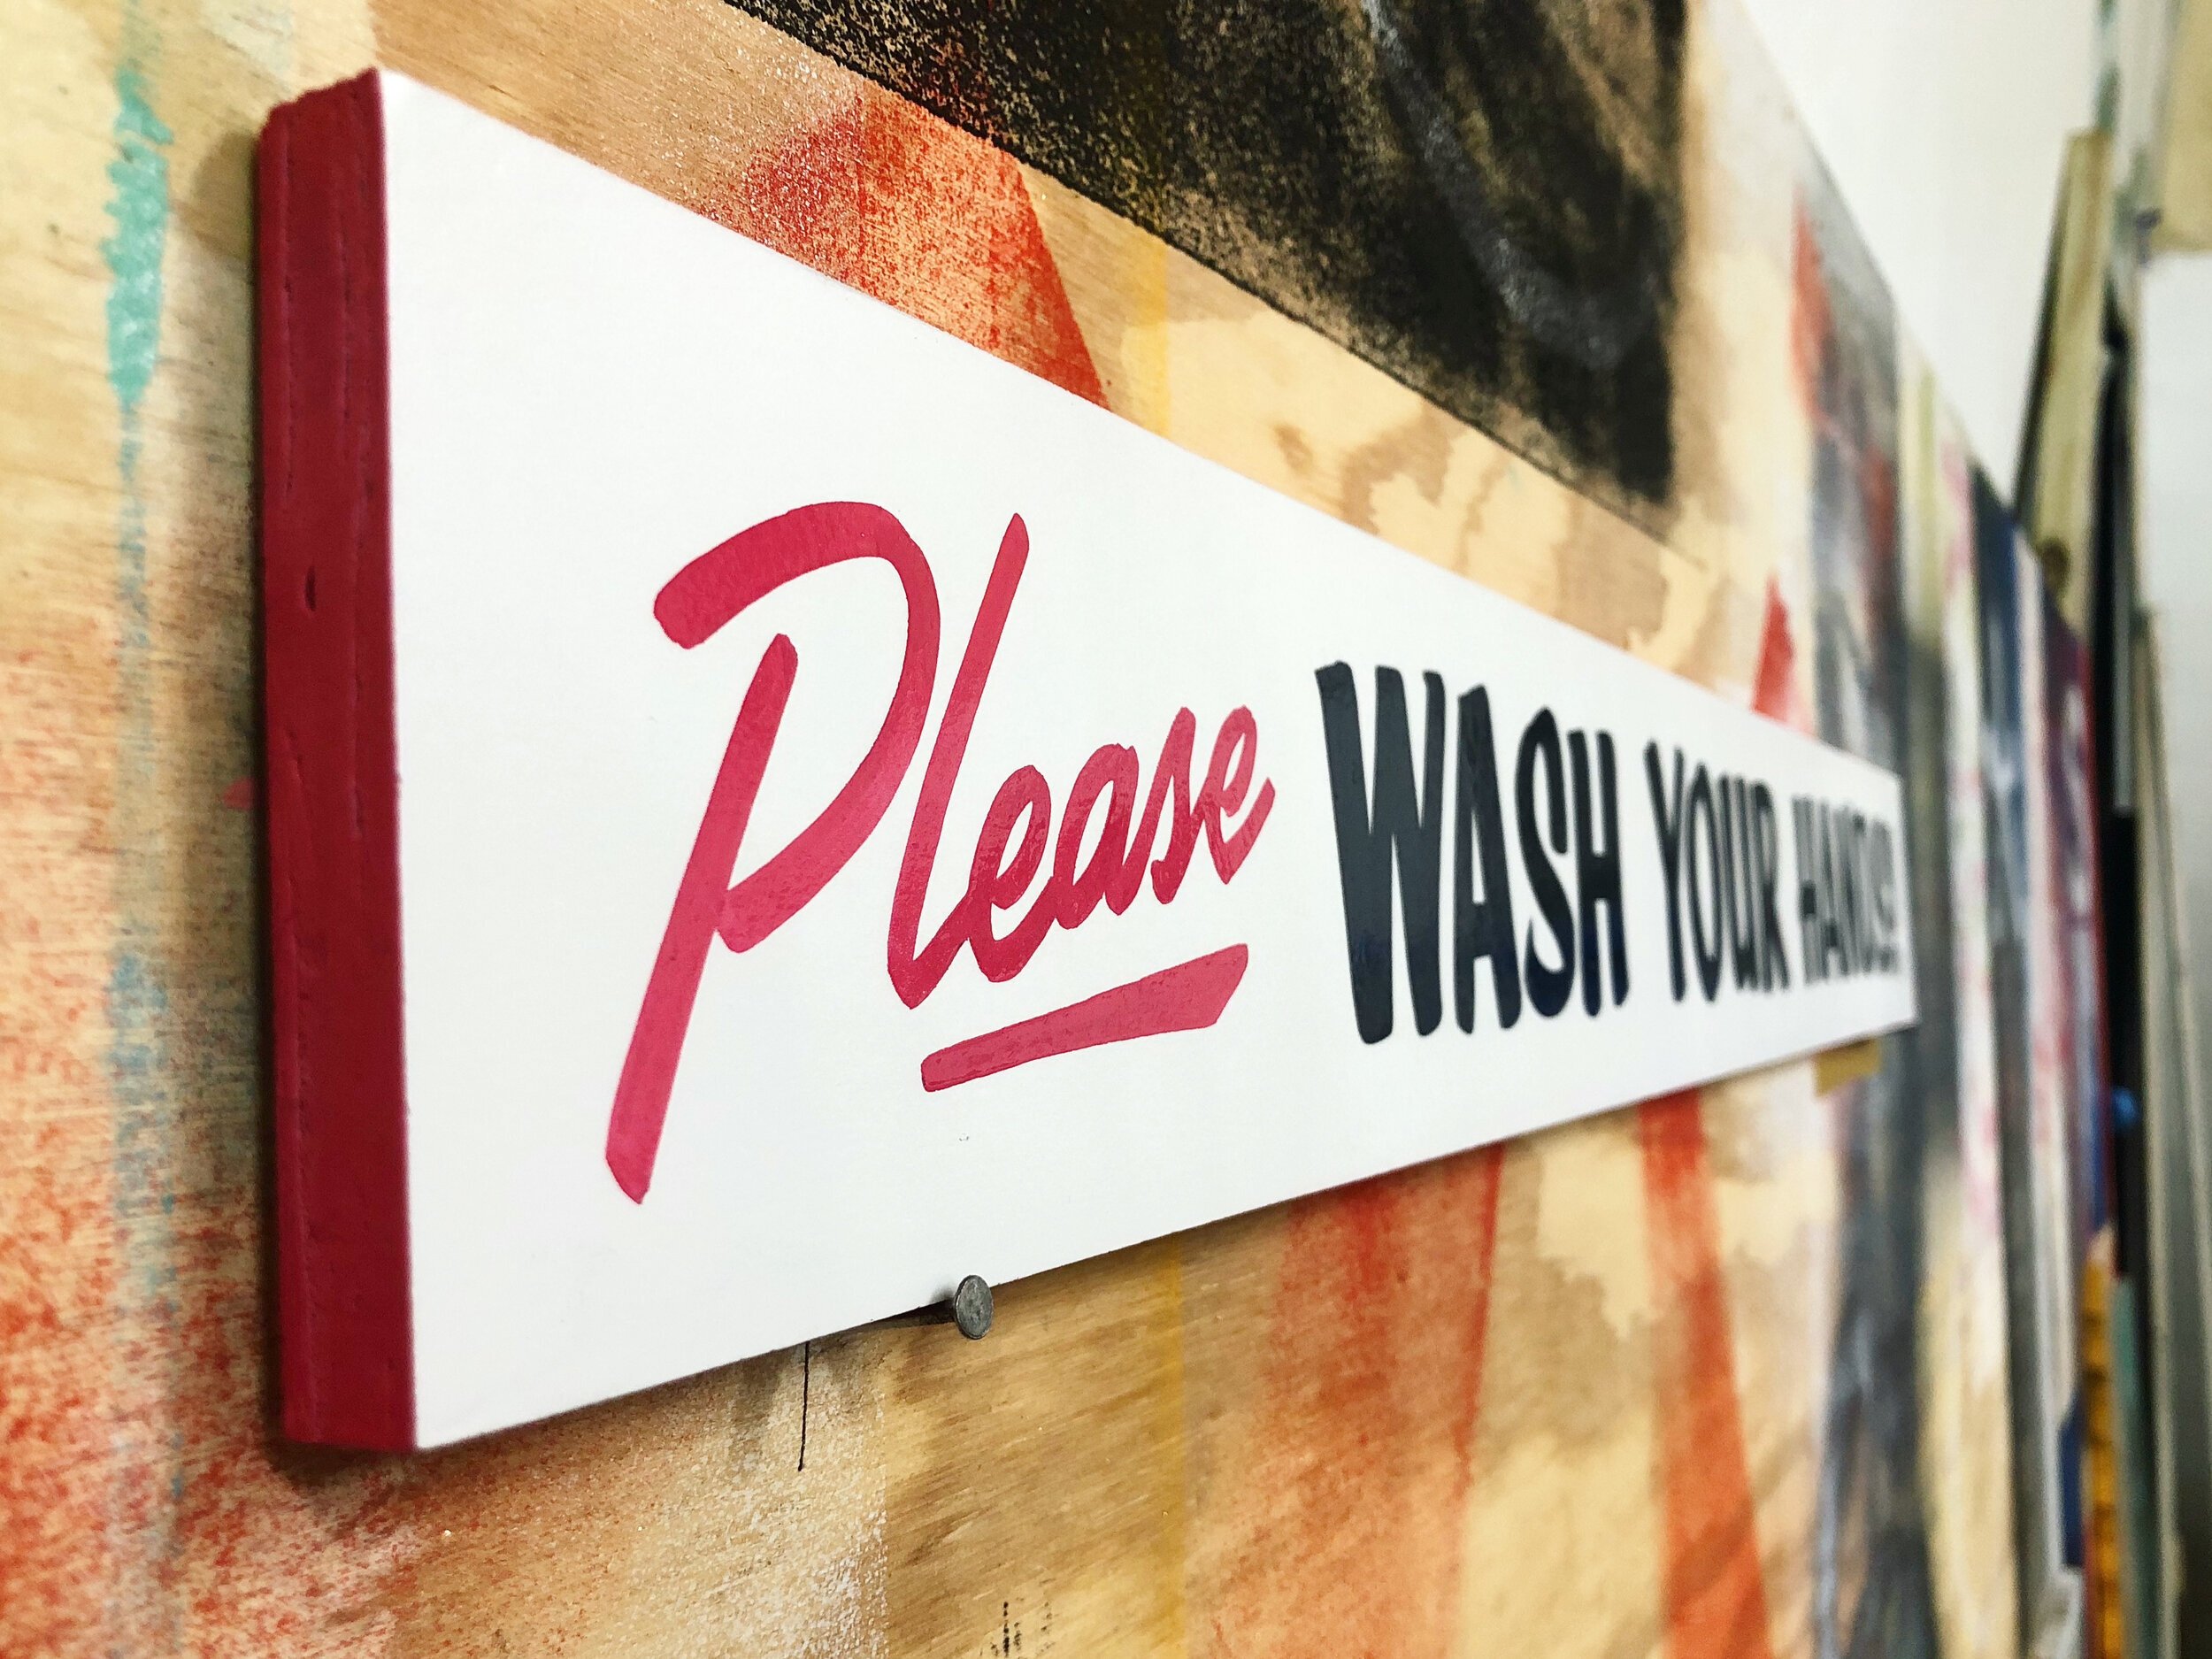 Handpainted "please wash your hands" sign